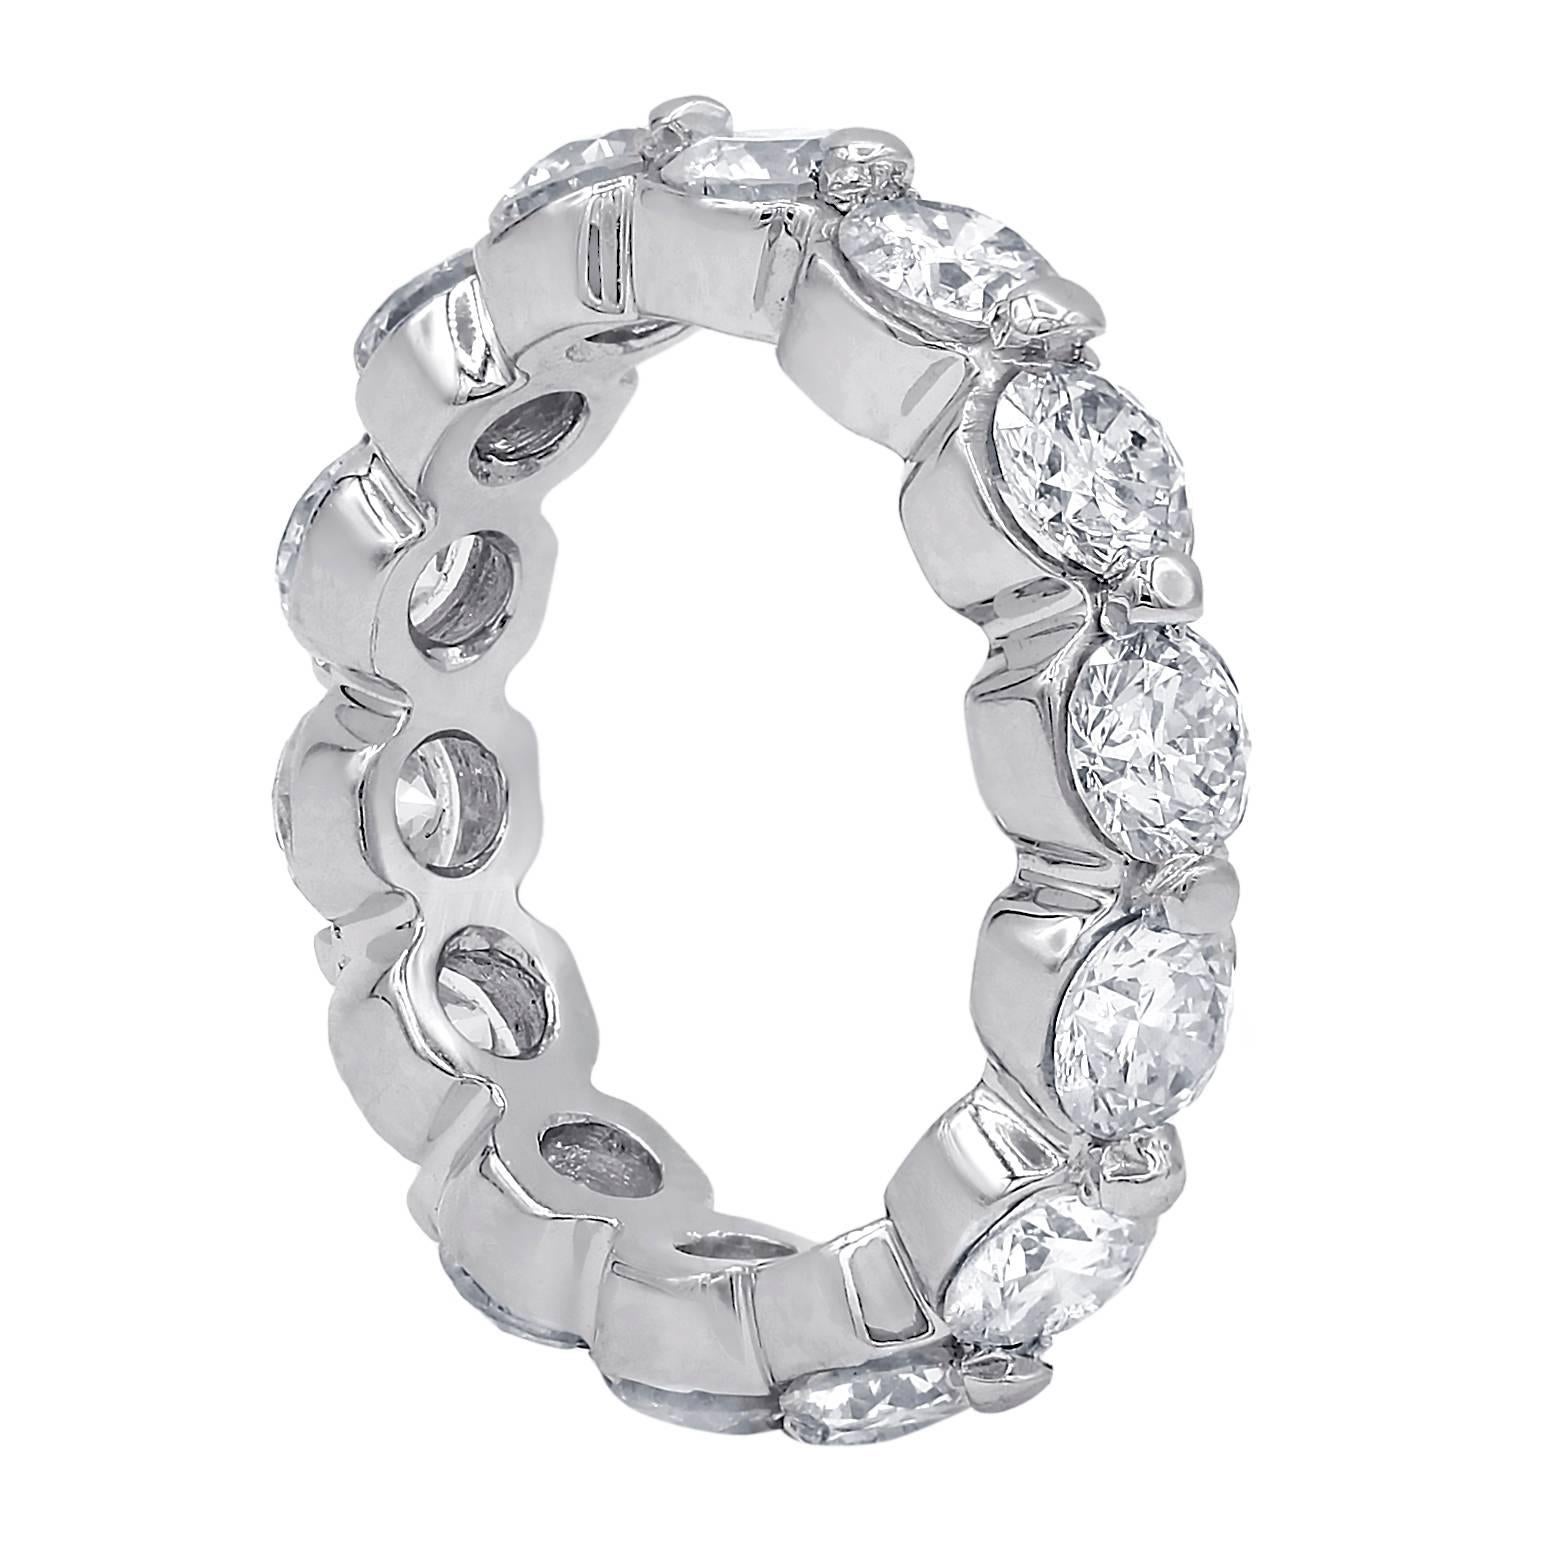 Custom made and common prong eternity band with 14 round brilliant cut diamonds,weighing 3.01 carats total FG color and slightly included clarity and set in 18 karat white gold mounting.